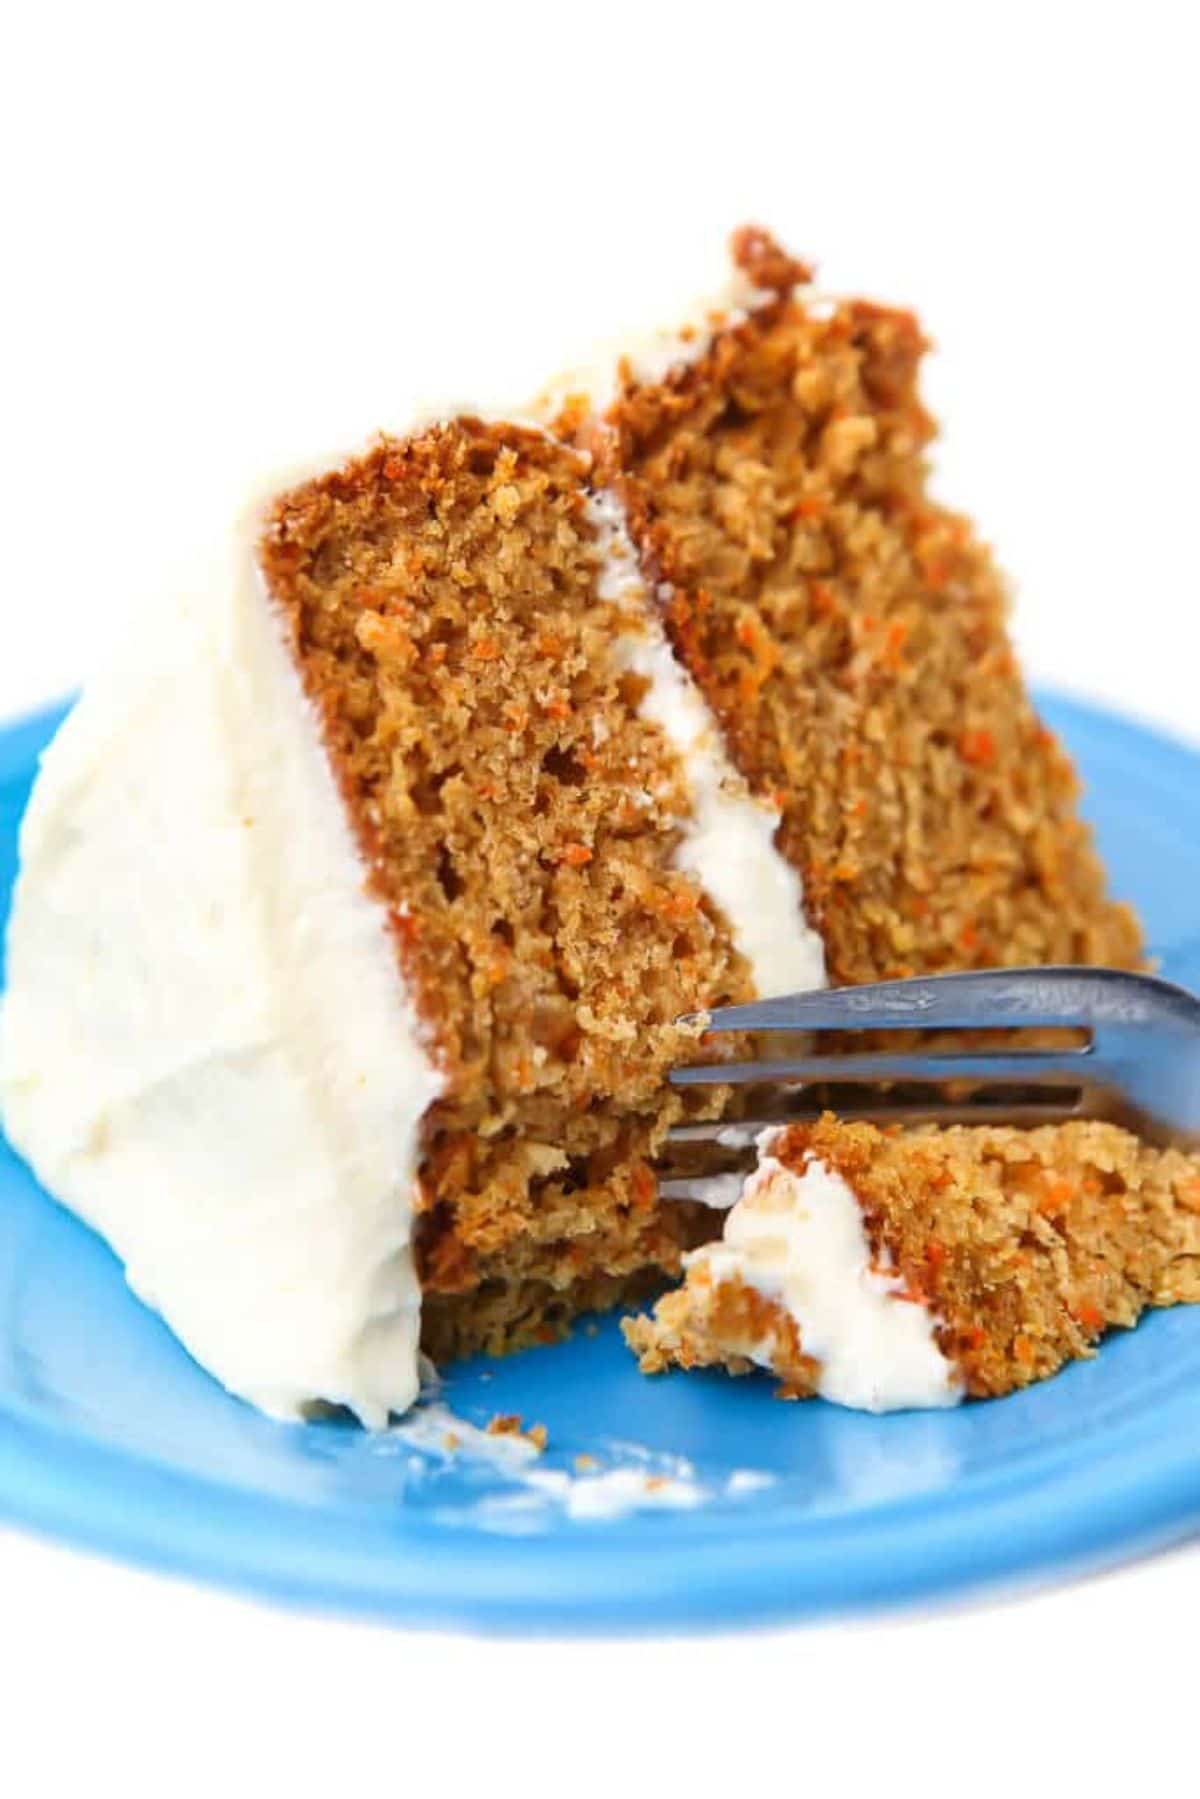 on a blue plate is a slice of carrot cake, iced, on it's side. A fork is cutting a seciton out of it